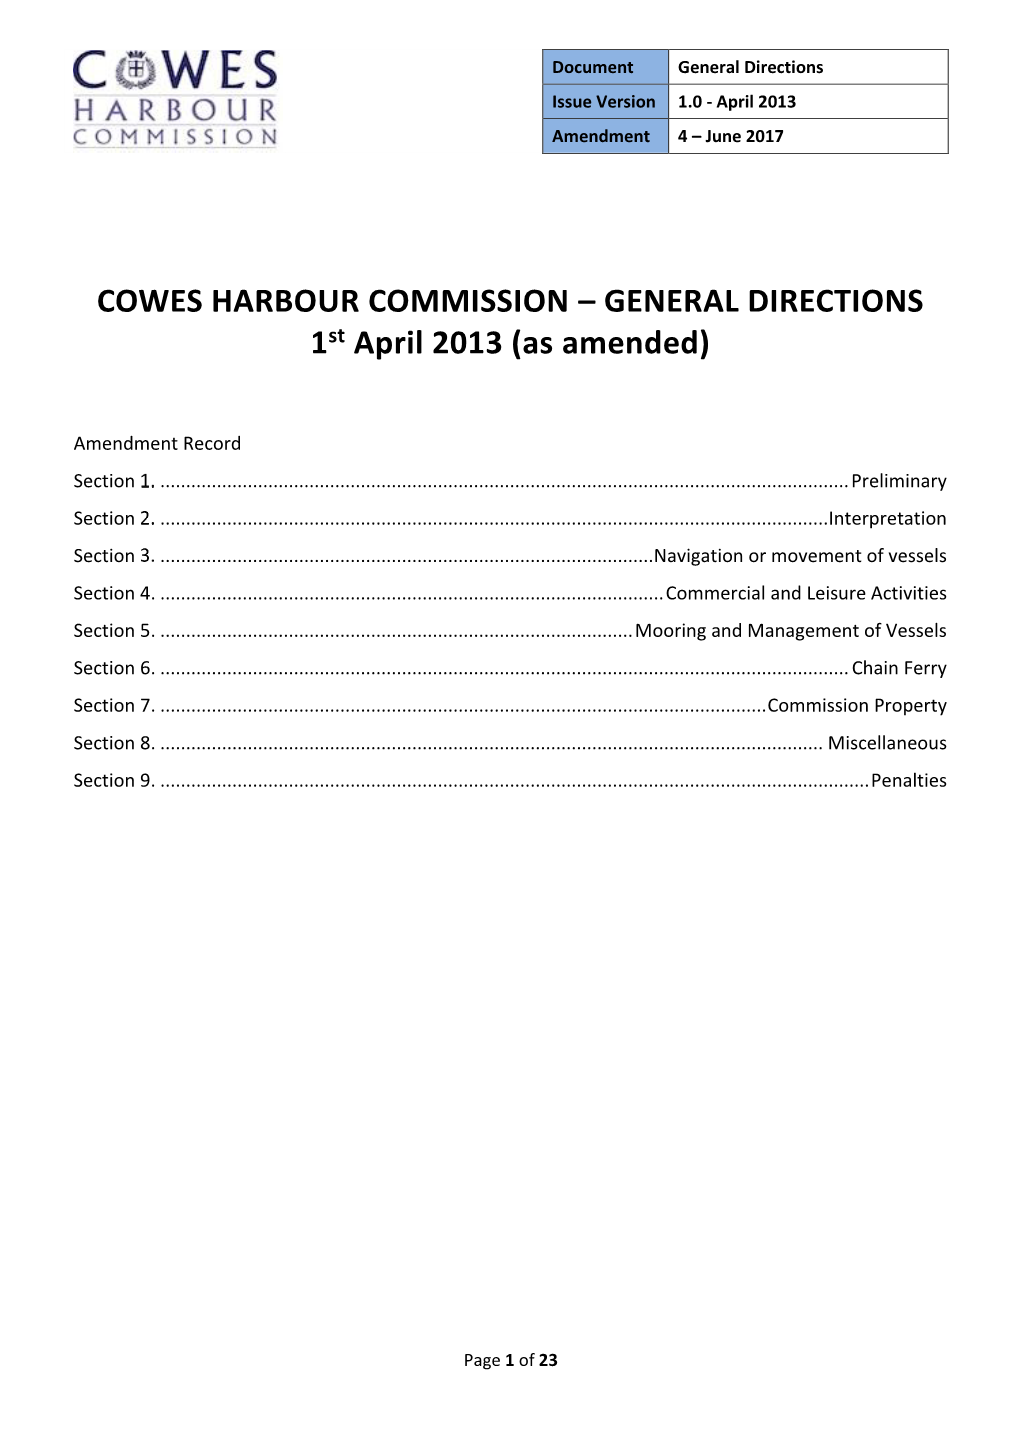 GENERAL DIRECTIONS 1St April 2013 (As Amended)